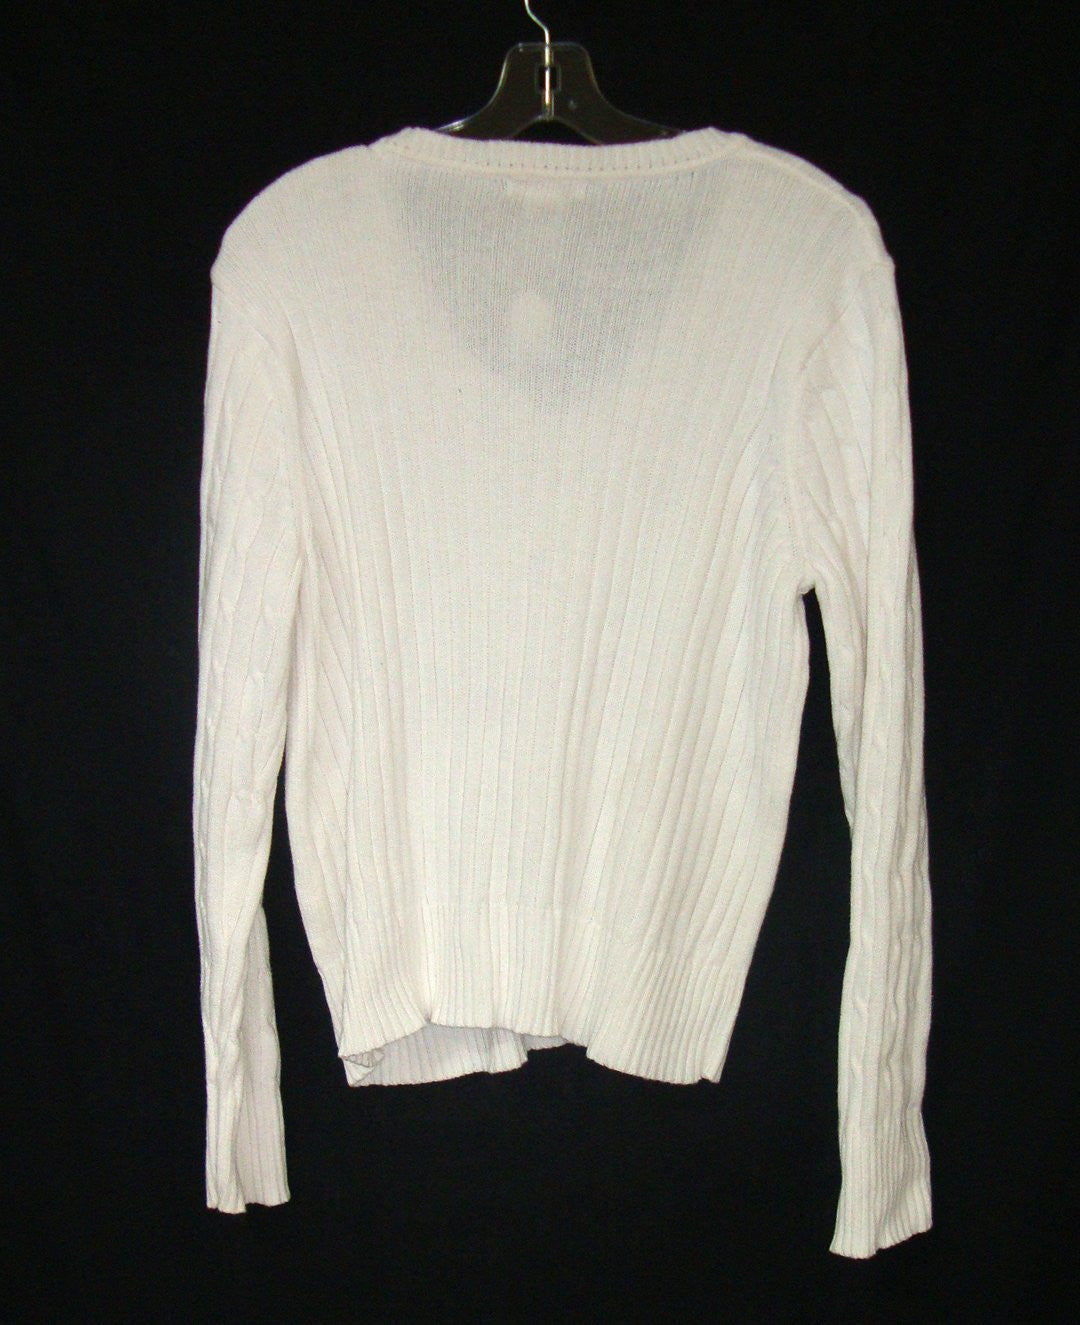 LESLIE FAY SPORT WHITE V-NECK CABLE KNIT SWEATER, LONG SLEEVE SZ LARGE Abby Essie